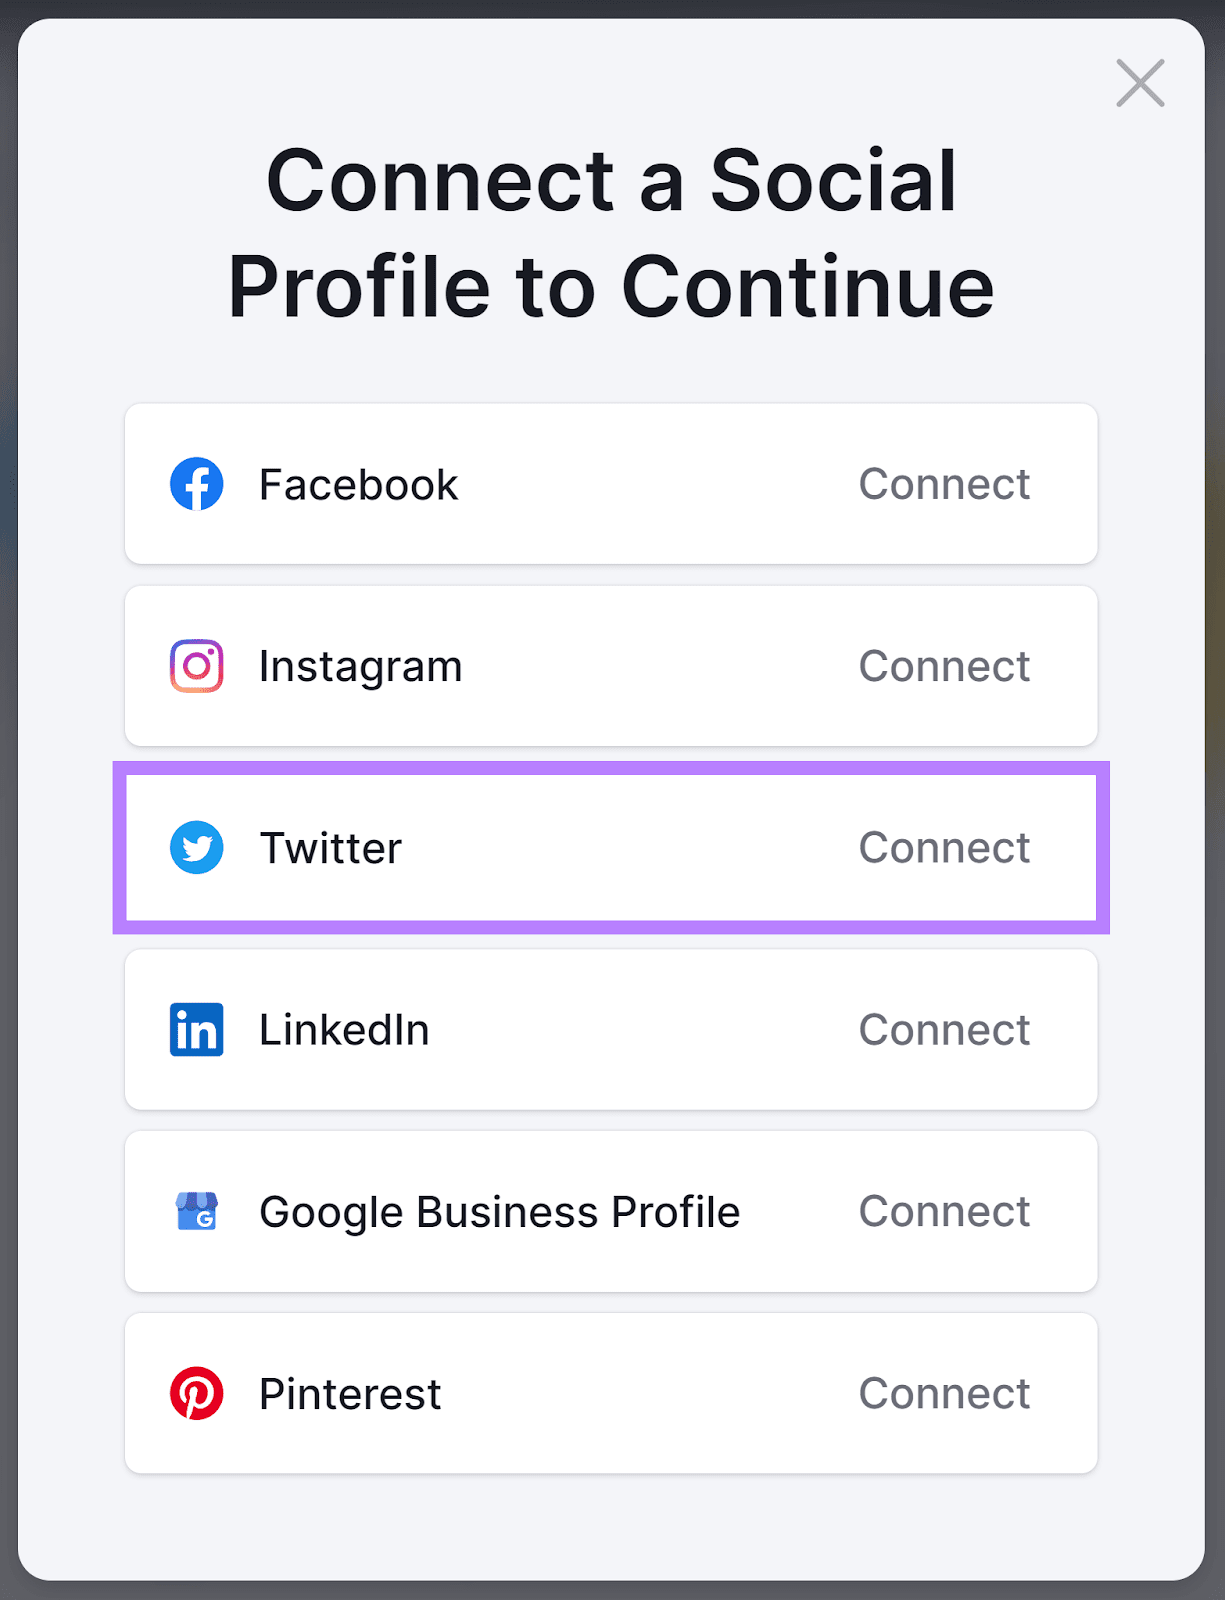 Connect to a Social Profile popup with Twitter option highlighted.